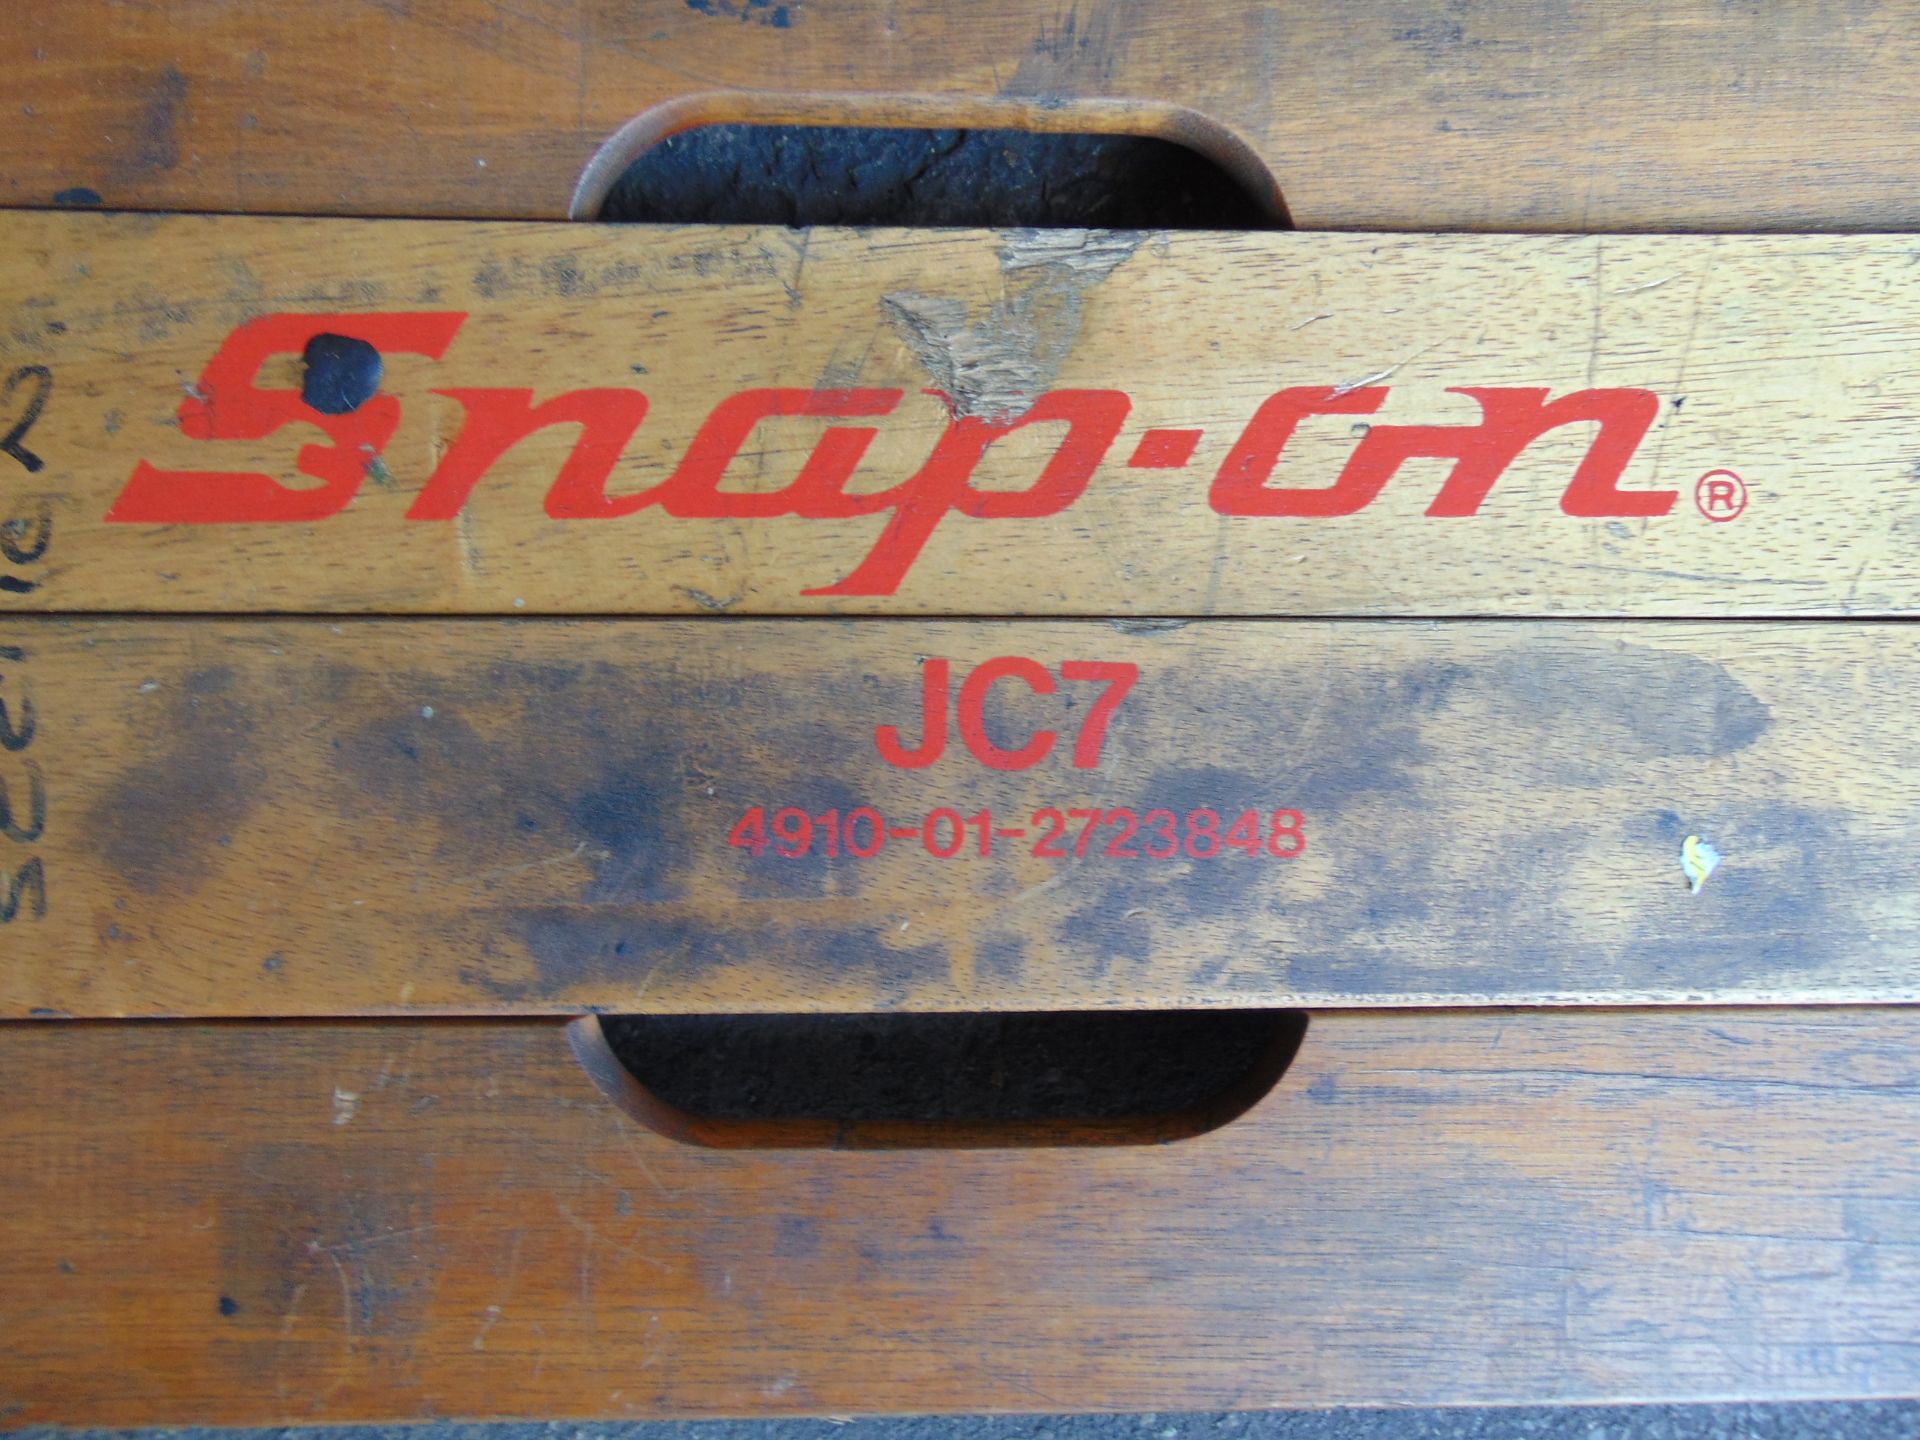 Vintage Snap On JC7 Creeper Board - Image 2 of 3